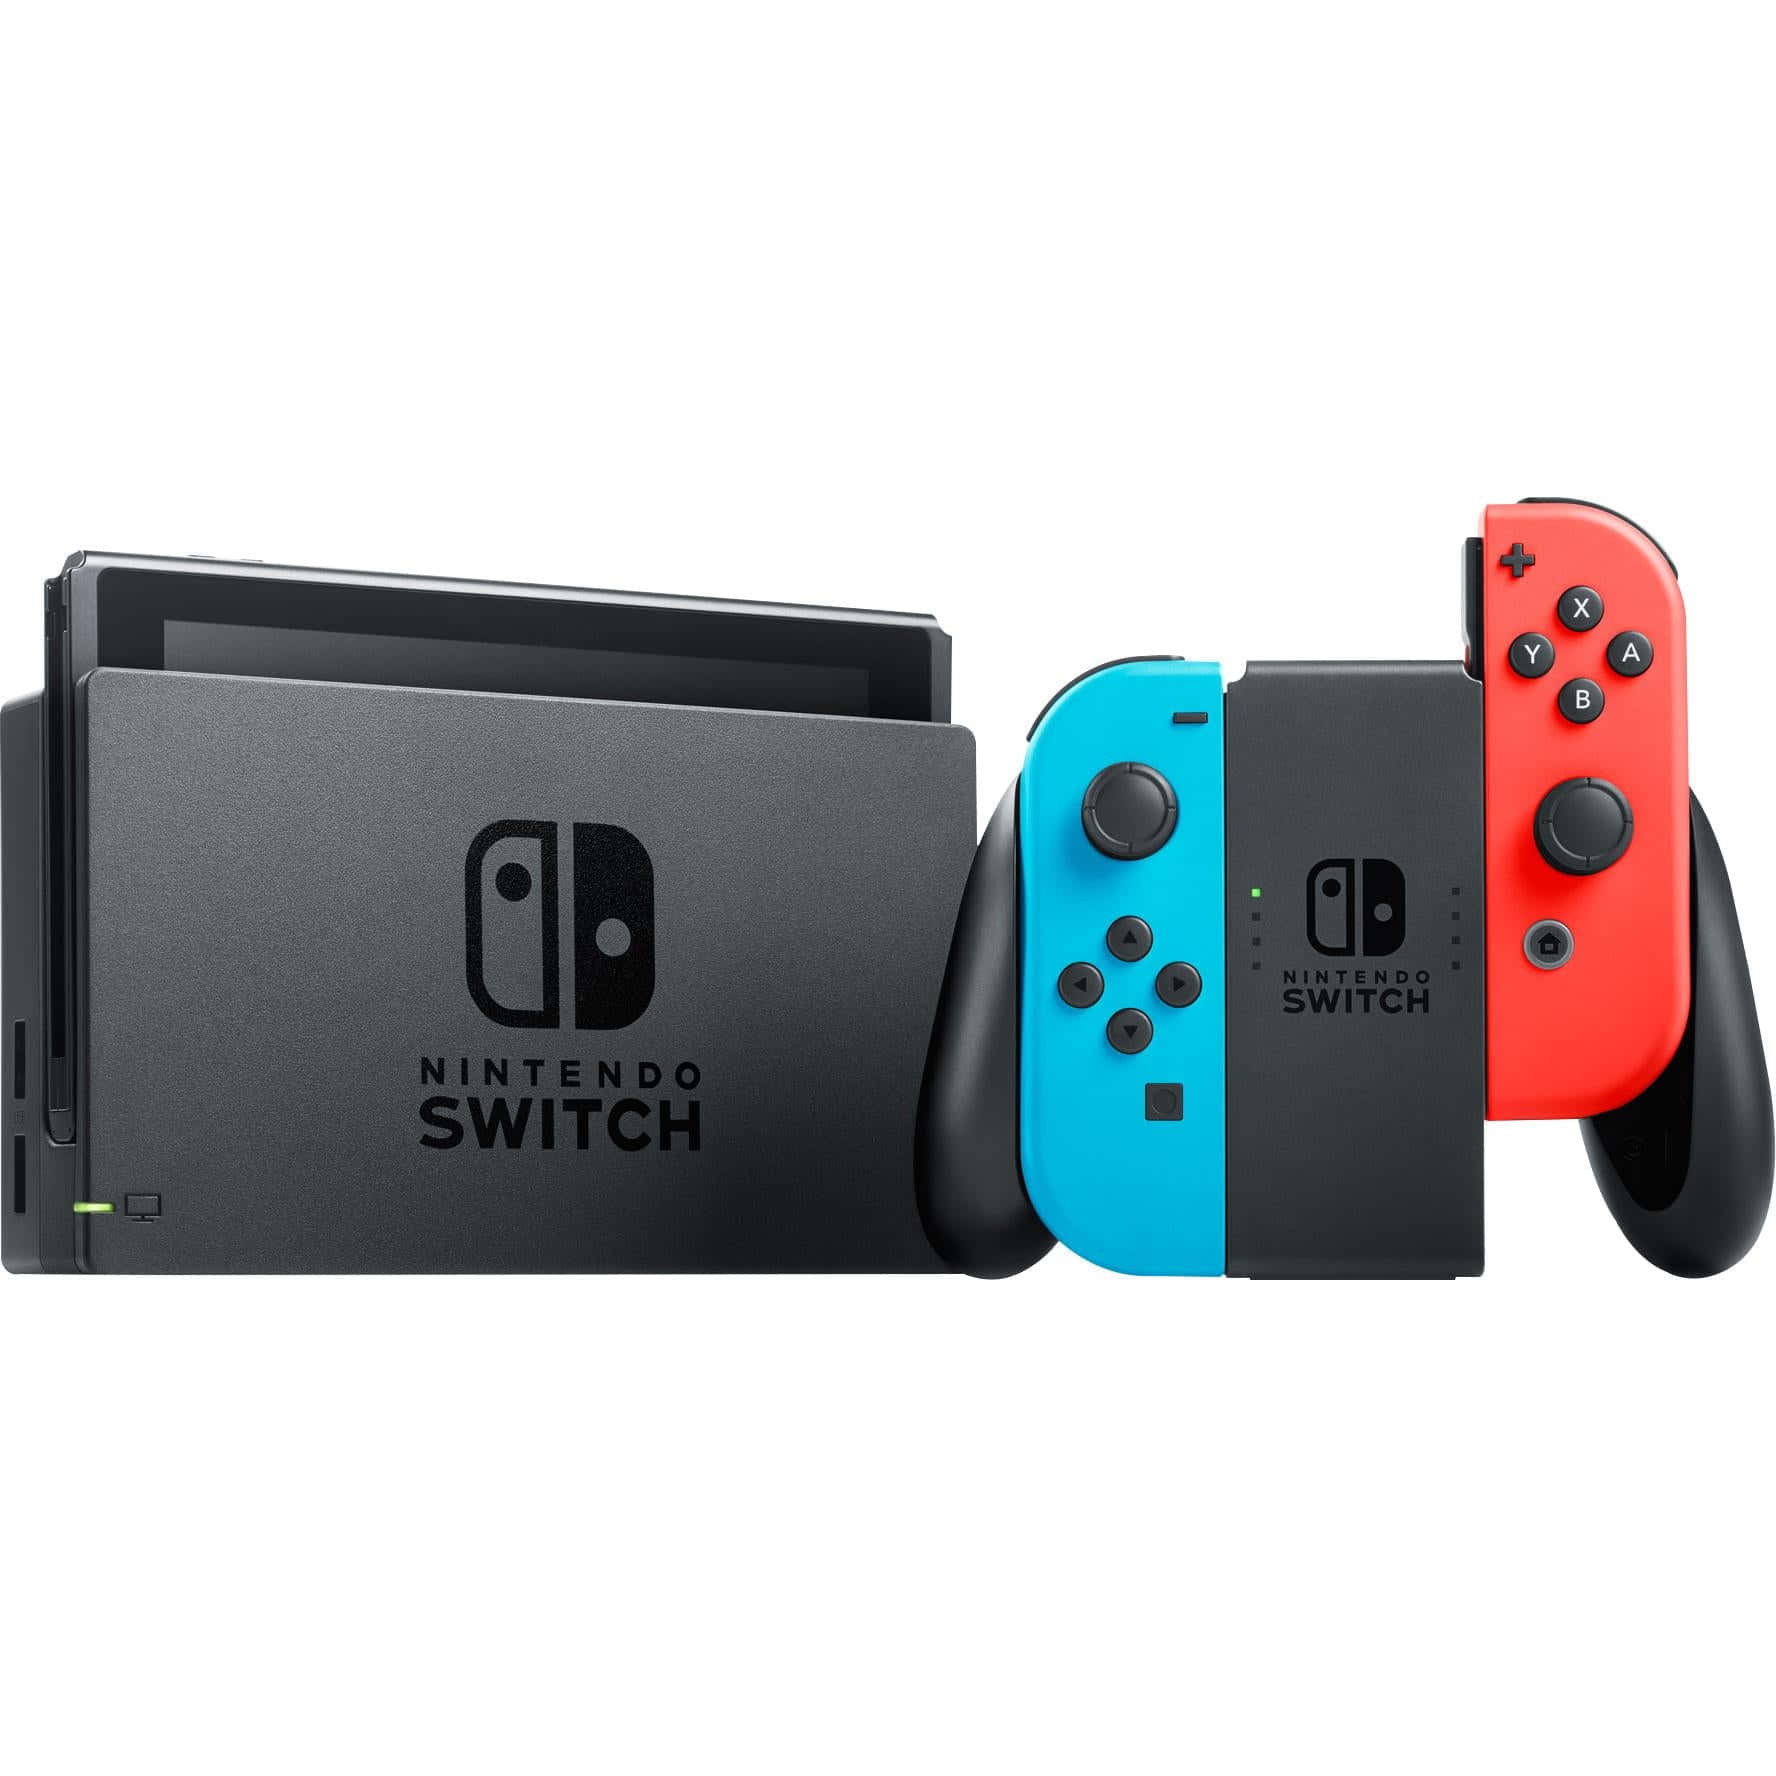 The Best of Home and Handheld Console Gaming: The Nintendo Switch